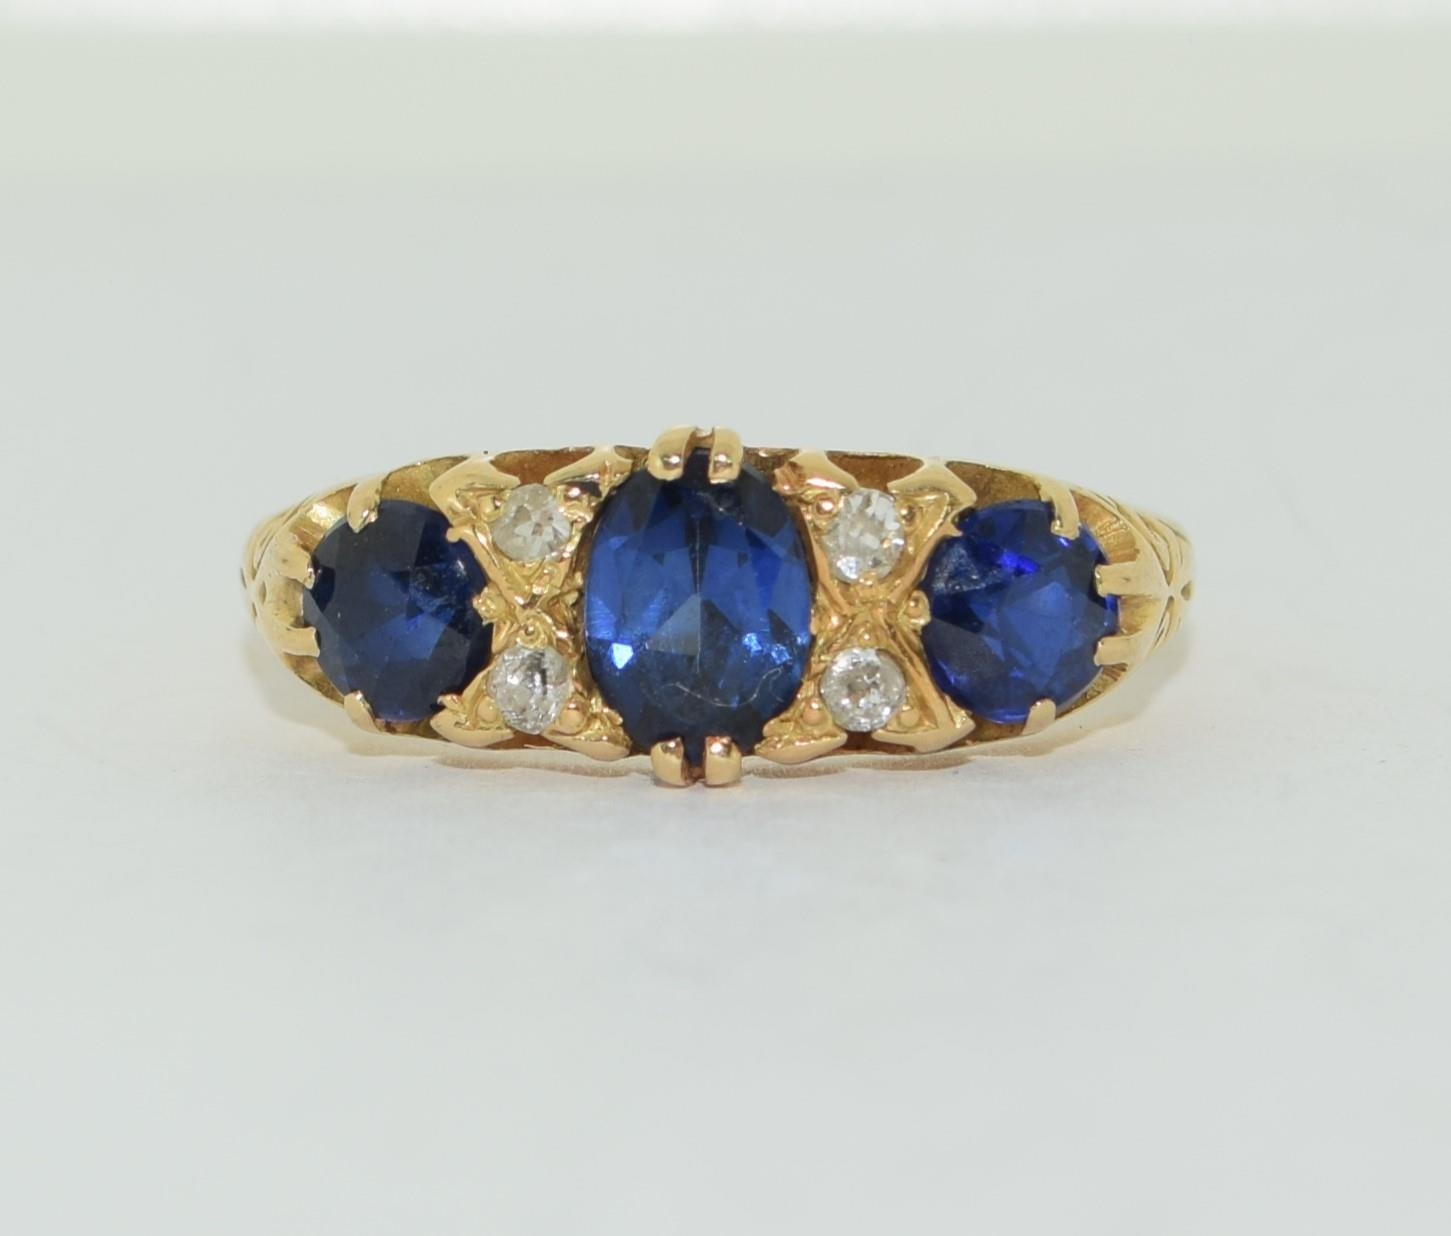 18ct gold Large Sapphire and Diamond Gypsy ring size O - Image 5 of 5